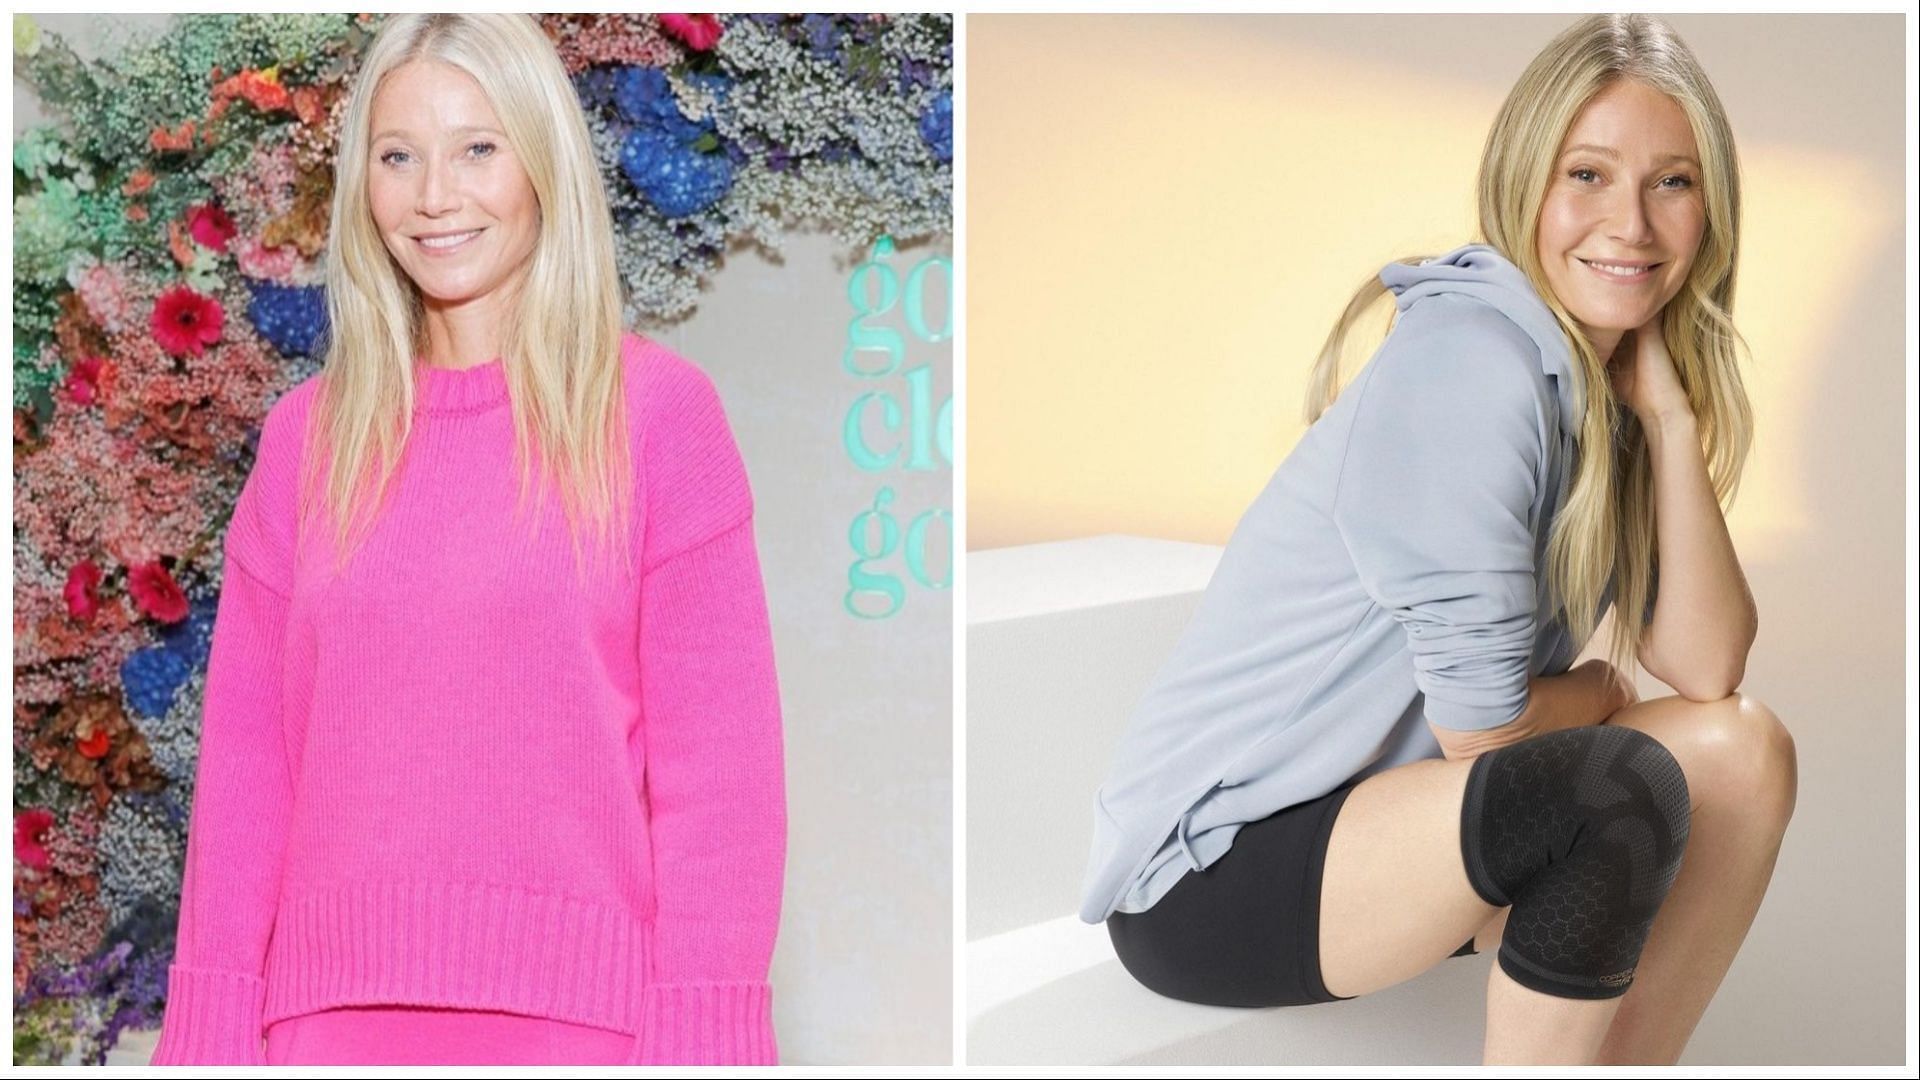 Gwyneth Paltrow dozed off during a Rolling Stones concert in 2012. (Images via Gwyneth Paltrow/Instagram)